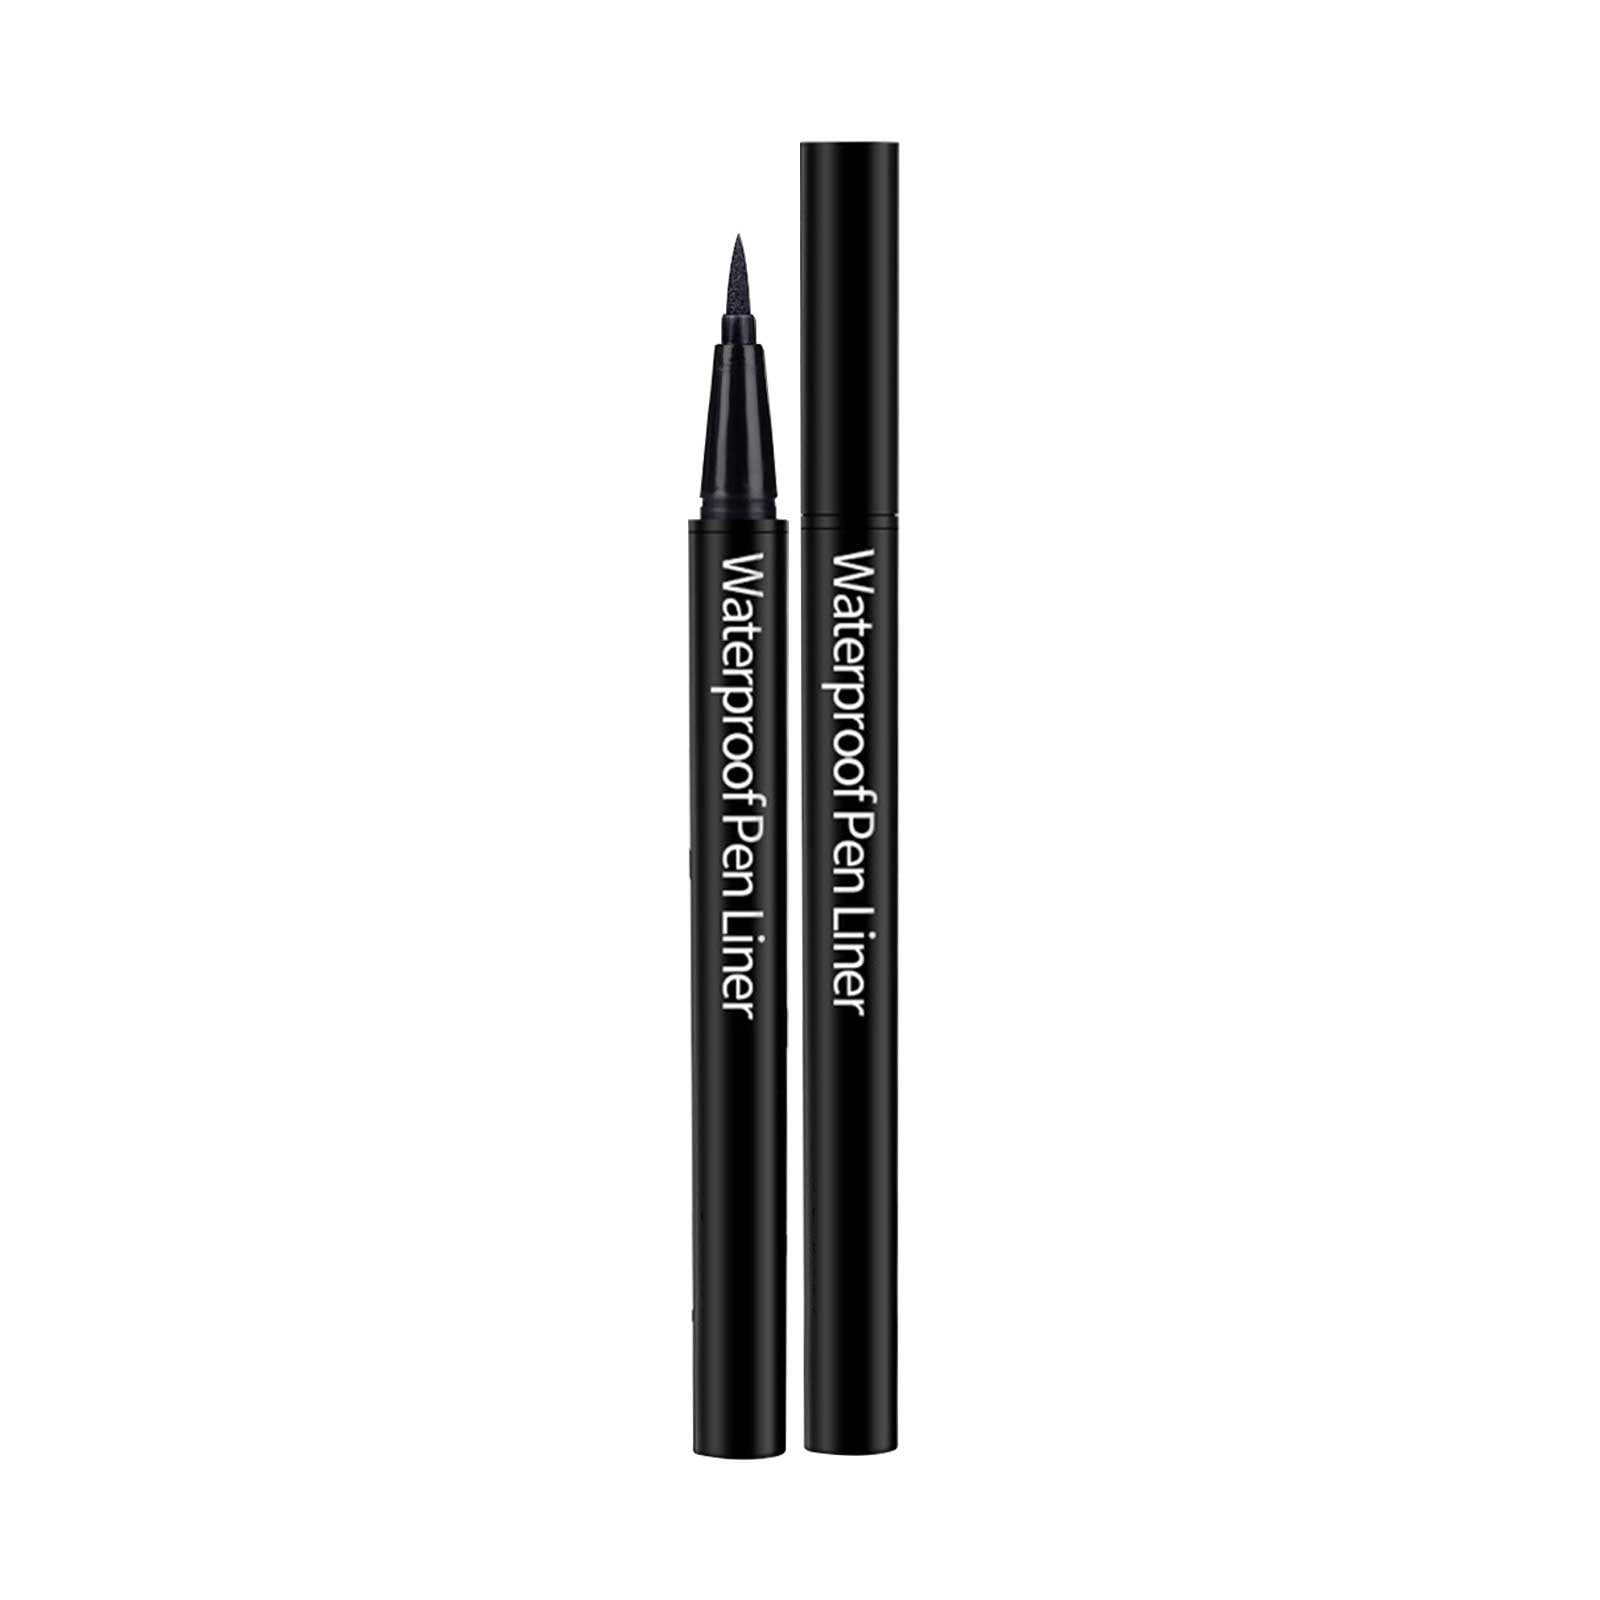  Fake Eyebrows Black/Brown/Transpare Diamond Magic Quick-drying  EyelinerPen3ML Multi-Functional Eyeliner White Pencil Makeup : Beauty &  Personal Care